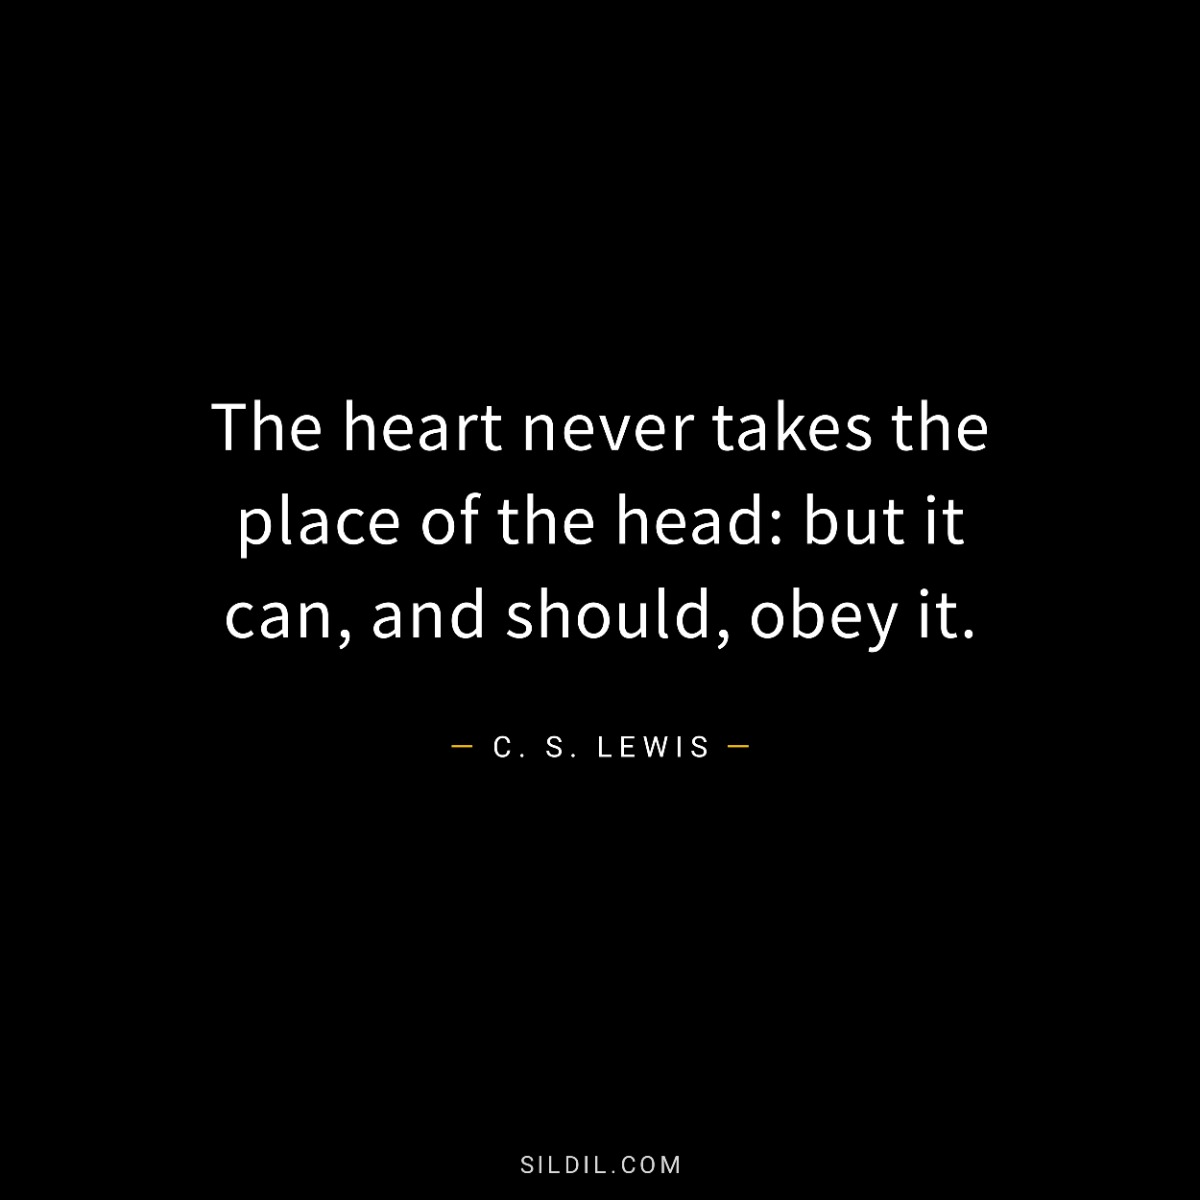 The heart never takes the place of the head: but it can, and should, obey it.